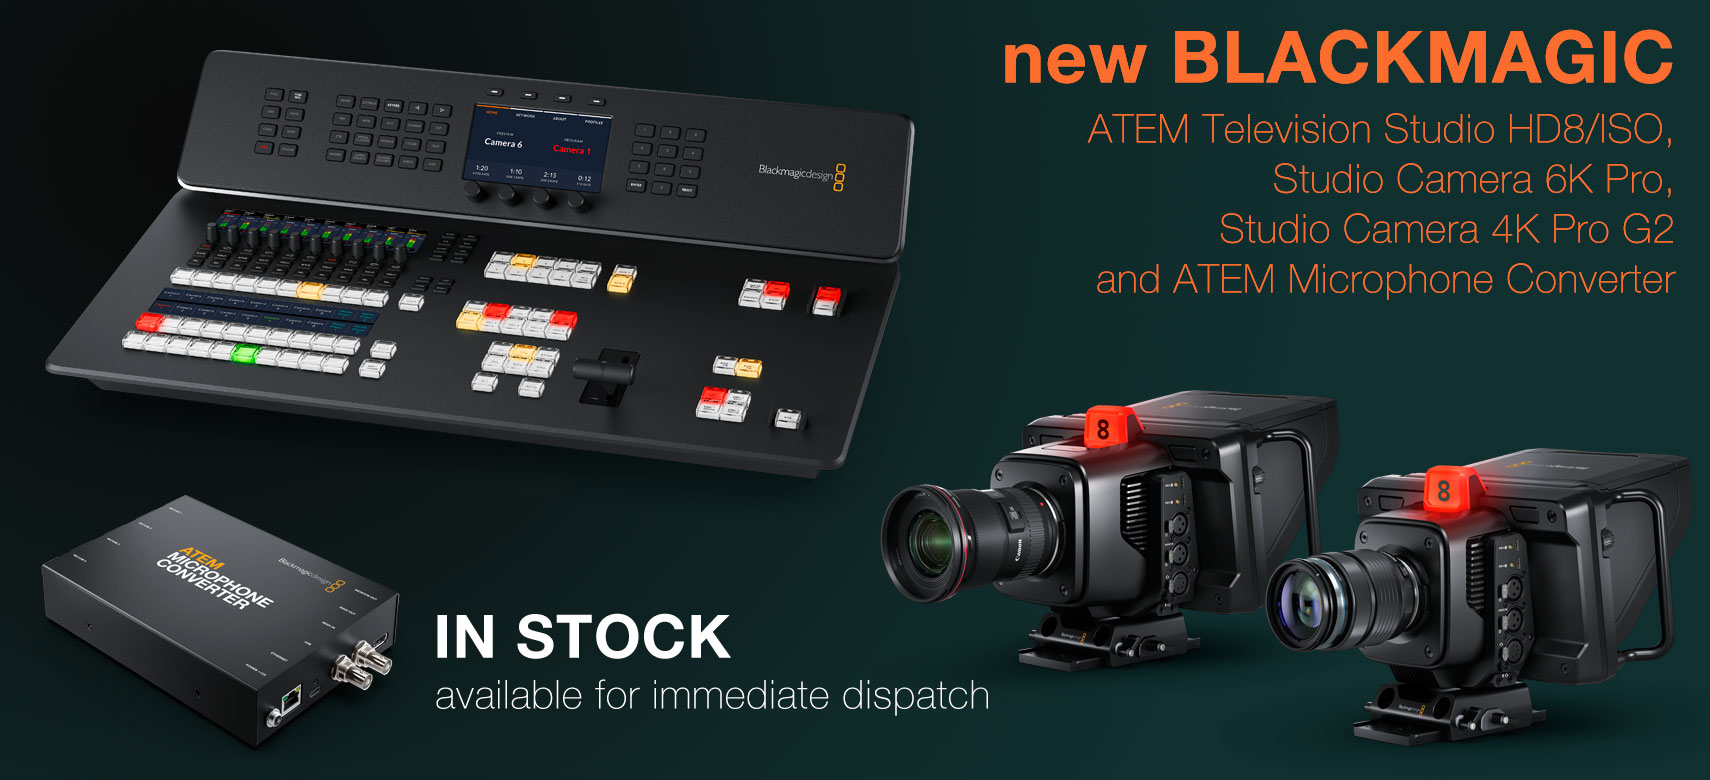 Blackmagic New Products